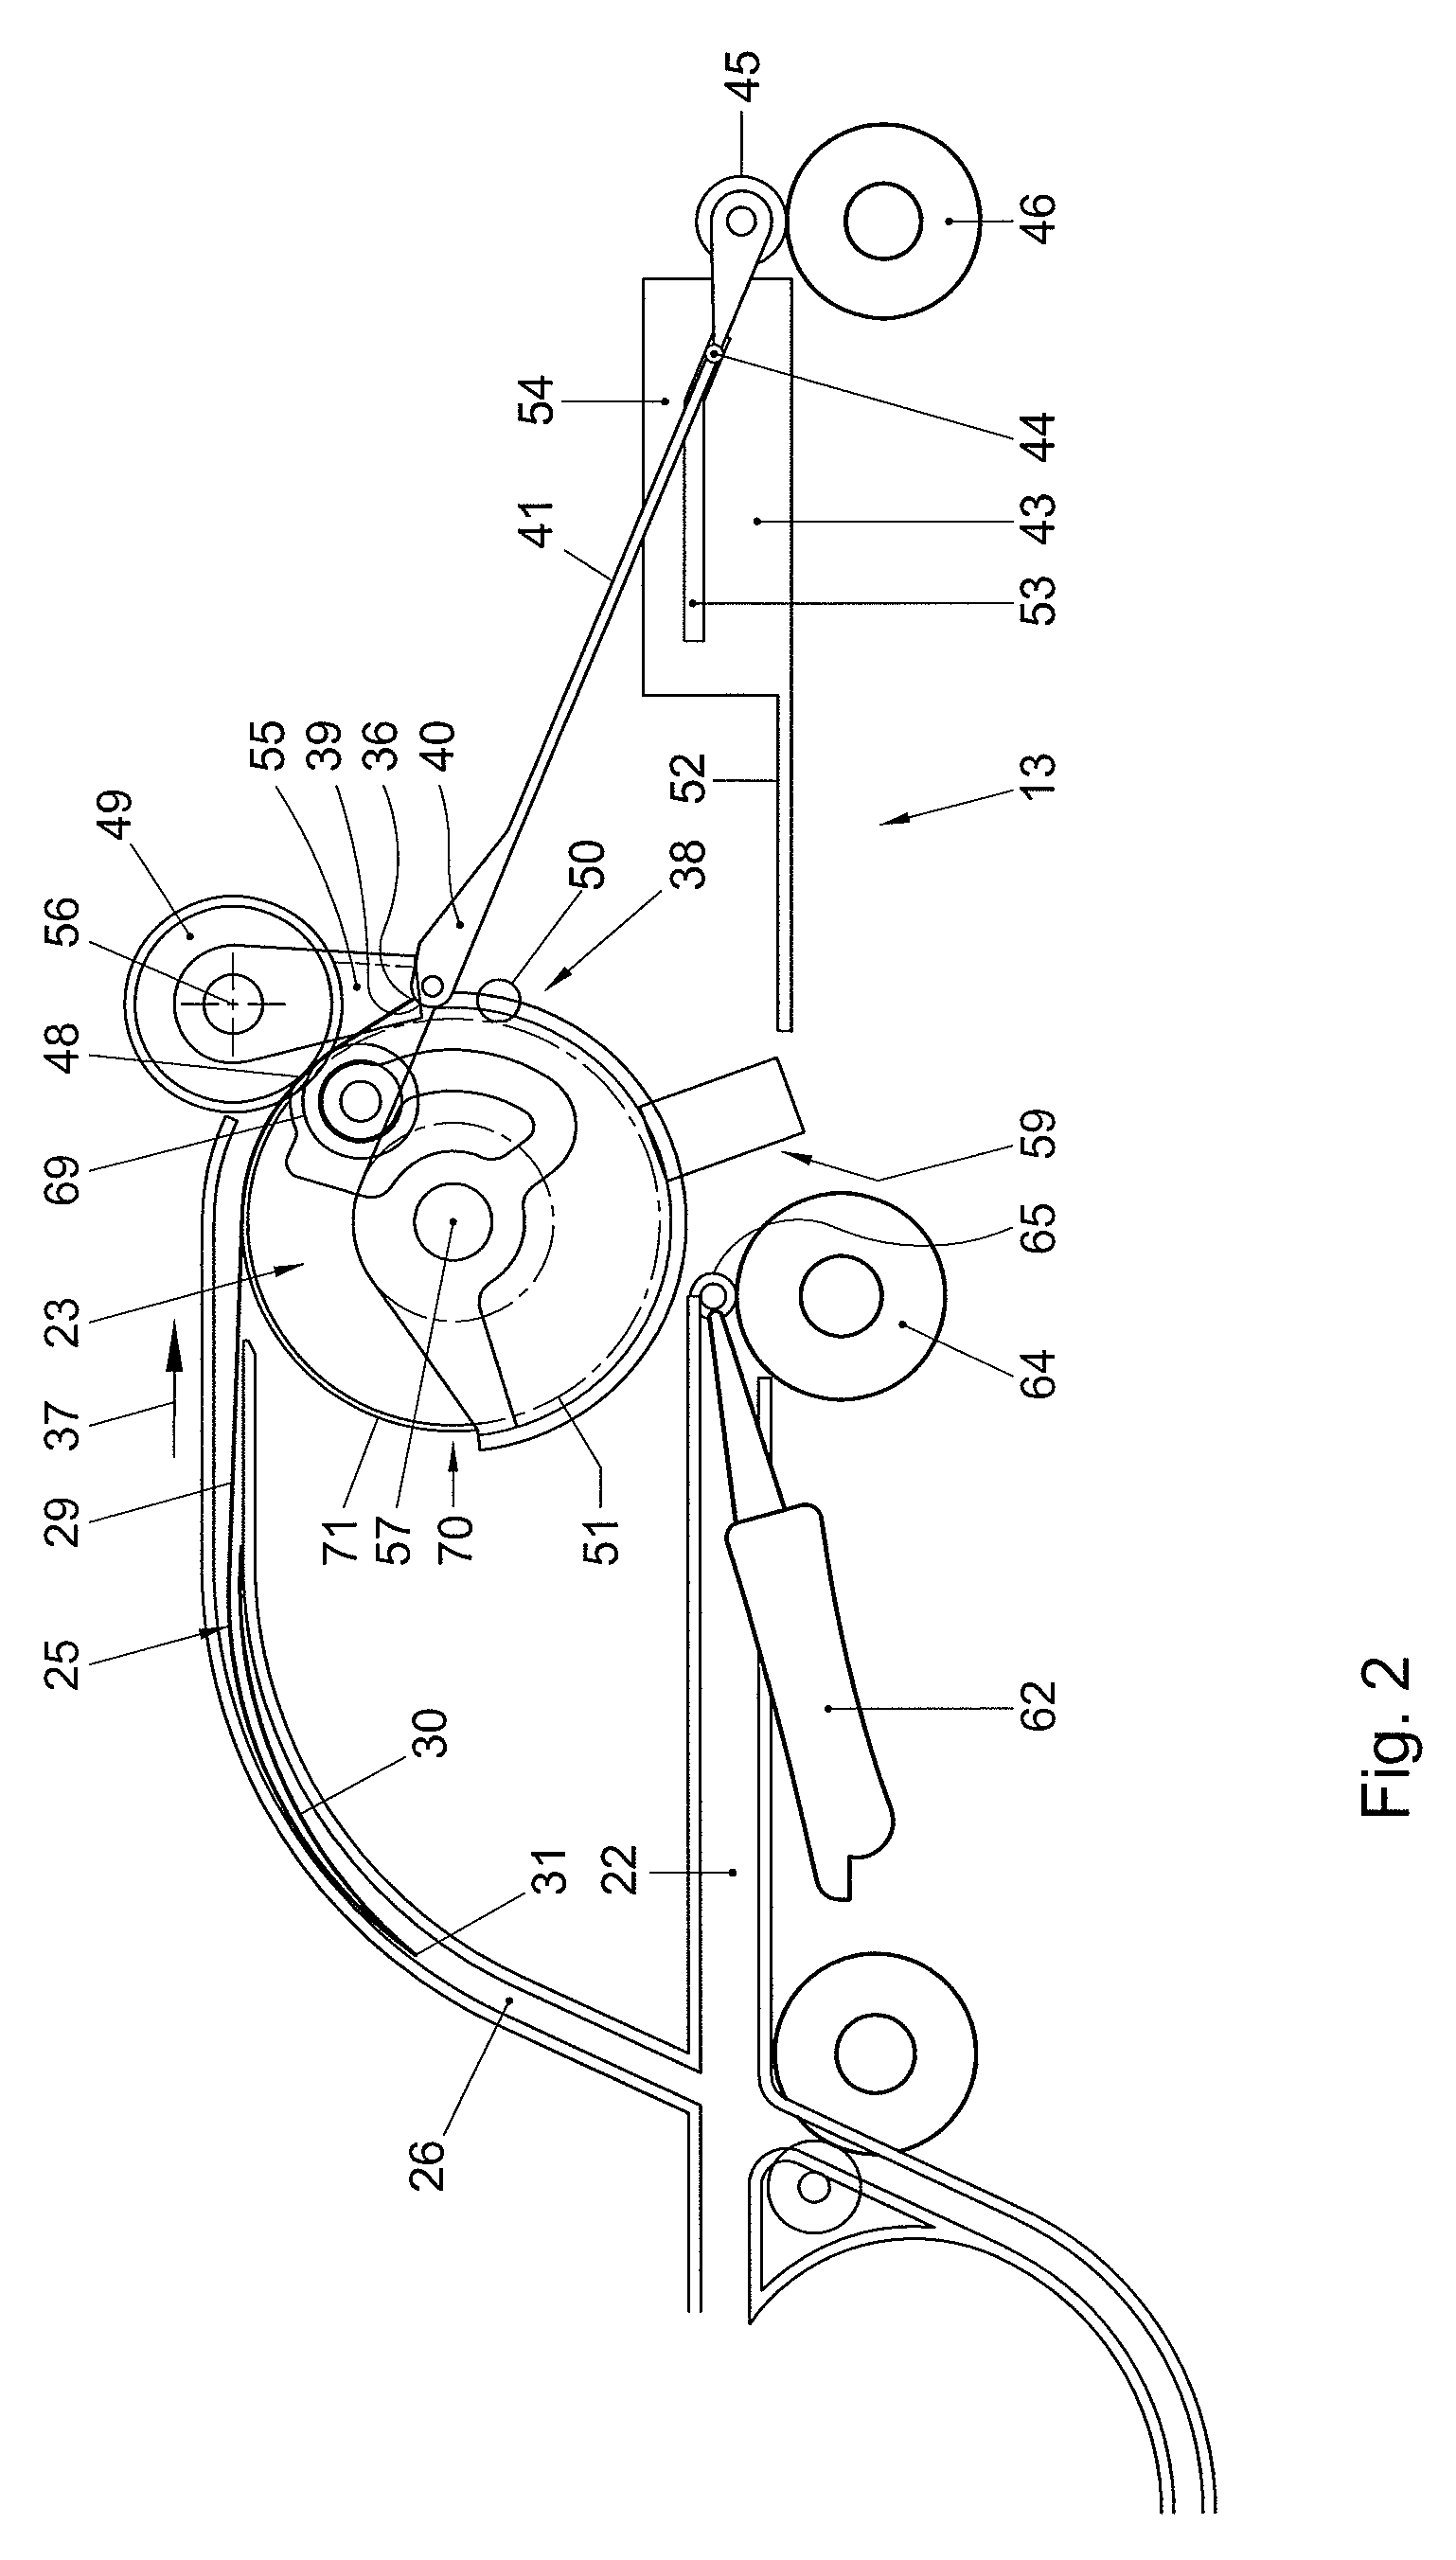 Method and an apparatus for inserting a postal item into an envelope